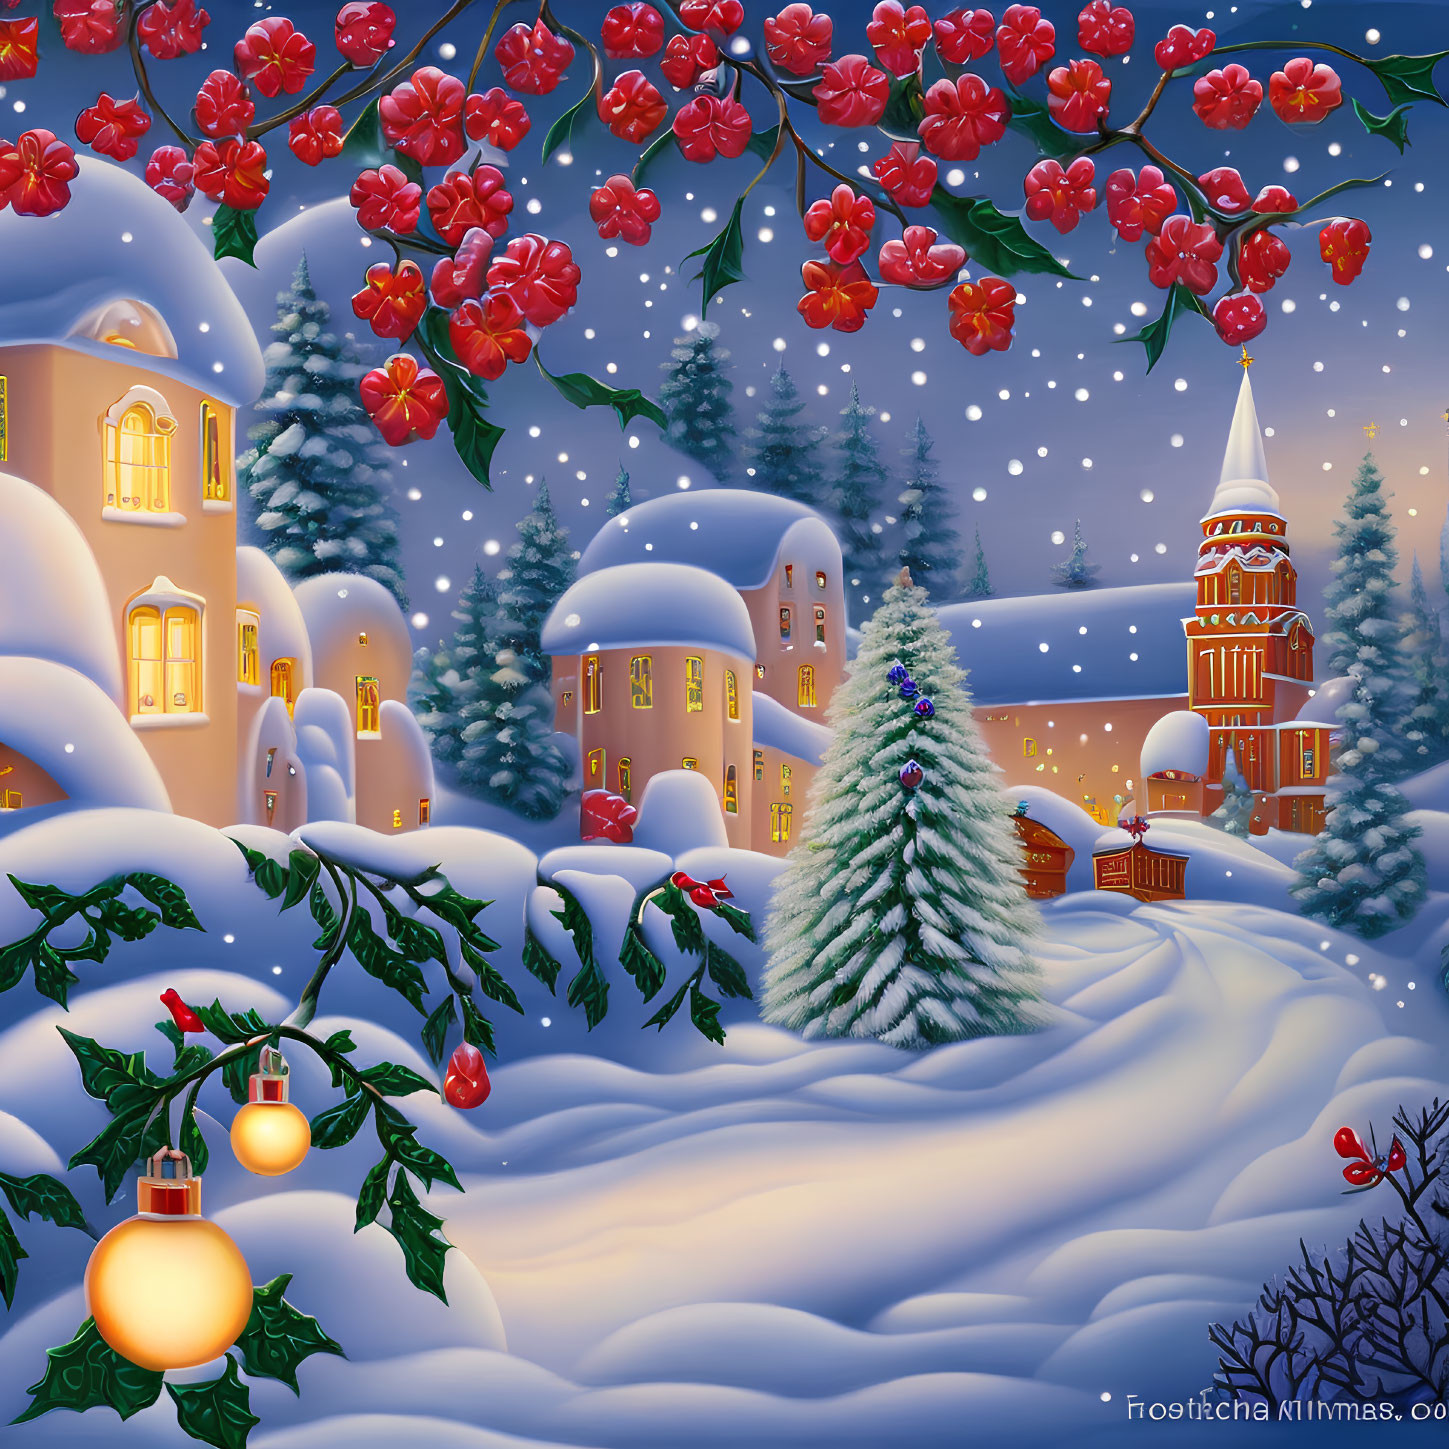 Snow-covered houses, Christmas tree, red berries, lanterns under starry sky